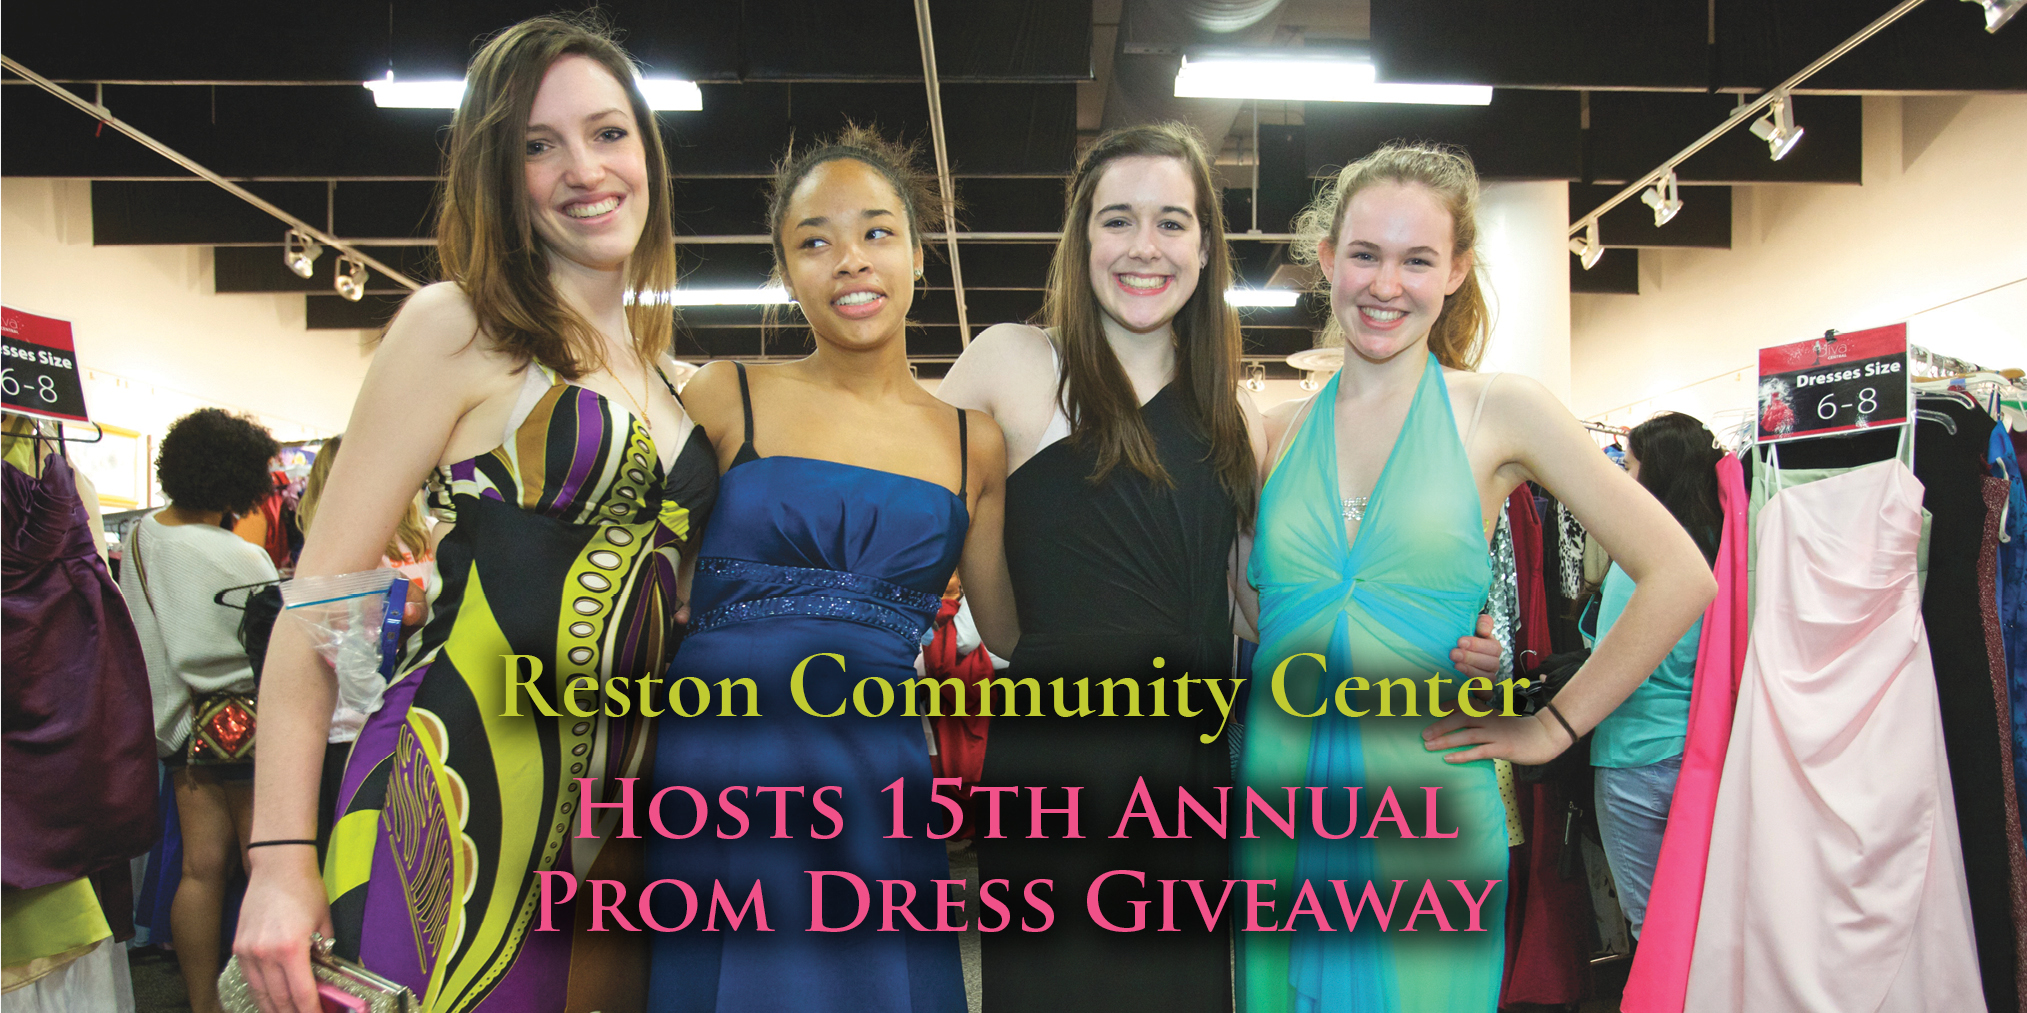 Reston Community Center Hosts 15th Annual Prom Dress Giveaway